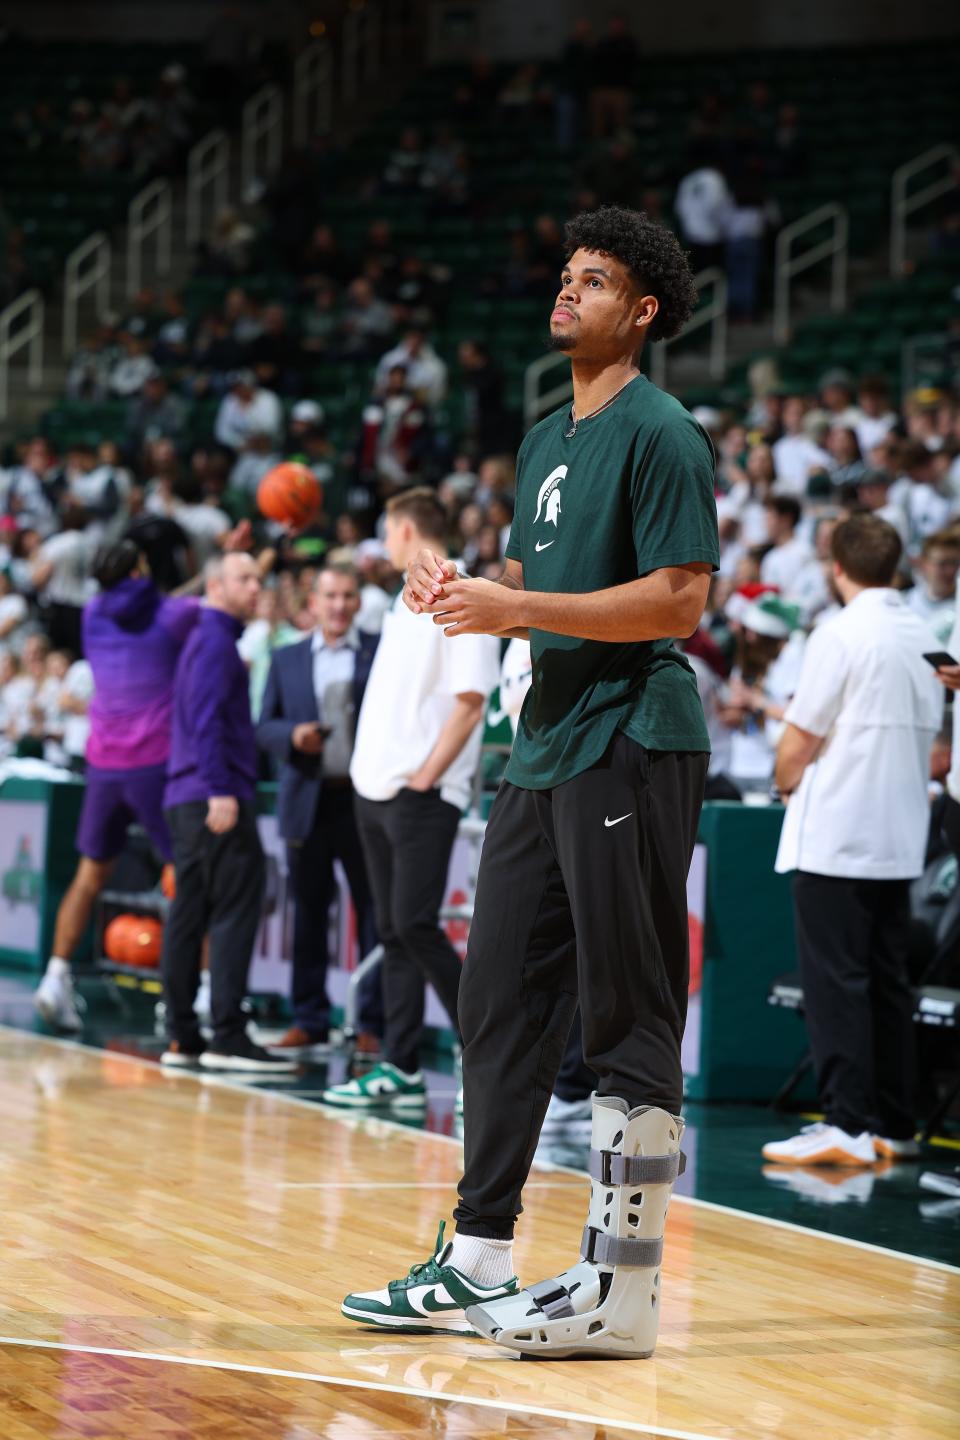 Injured Michigan State forward Malik Hall looks on during warmups before team's 70-63 loss against the Northwestern Wildcats at Breslin Center on Dec. 4, 2022 in East Lansing, Michigan.